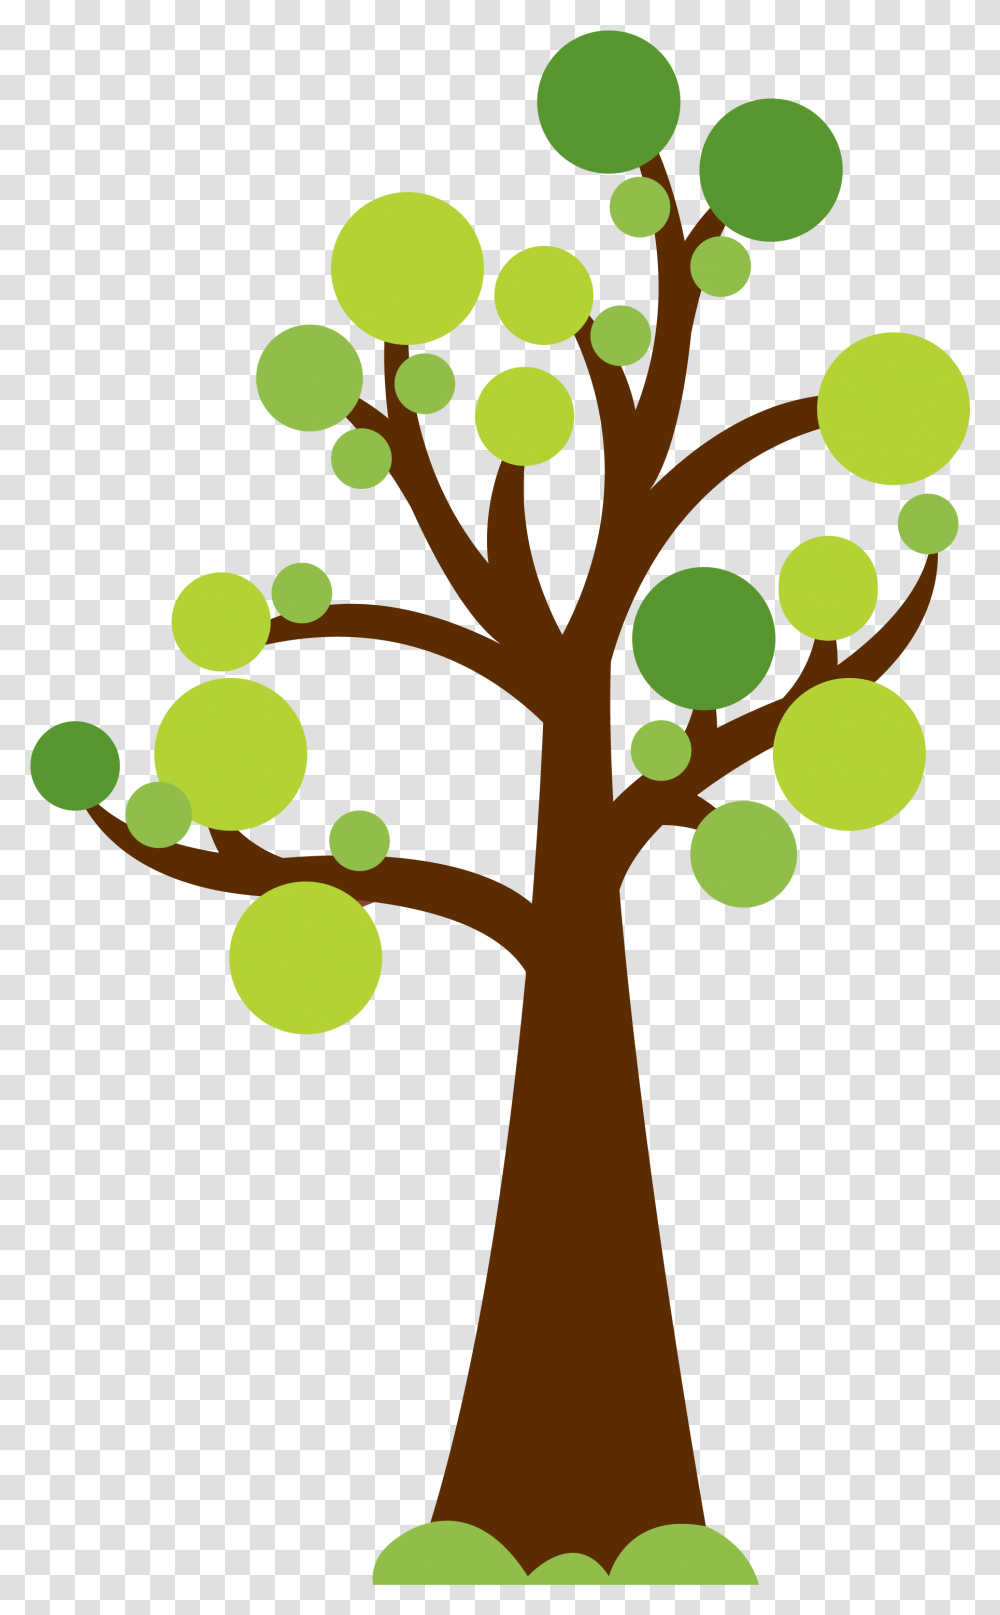 Diversity Drawing Tree Logo & Clipart Free Cute Tree Clipart, Graphics, Cross, Symbol, Floral Design Transparent Png